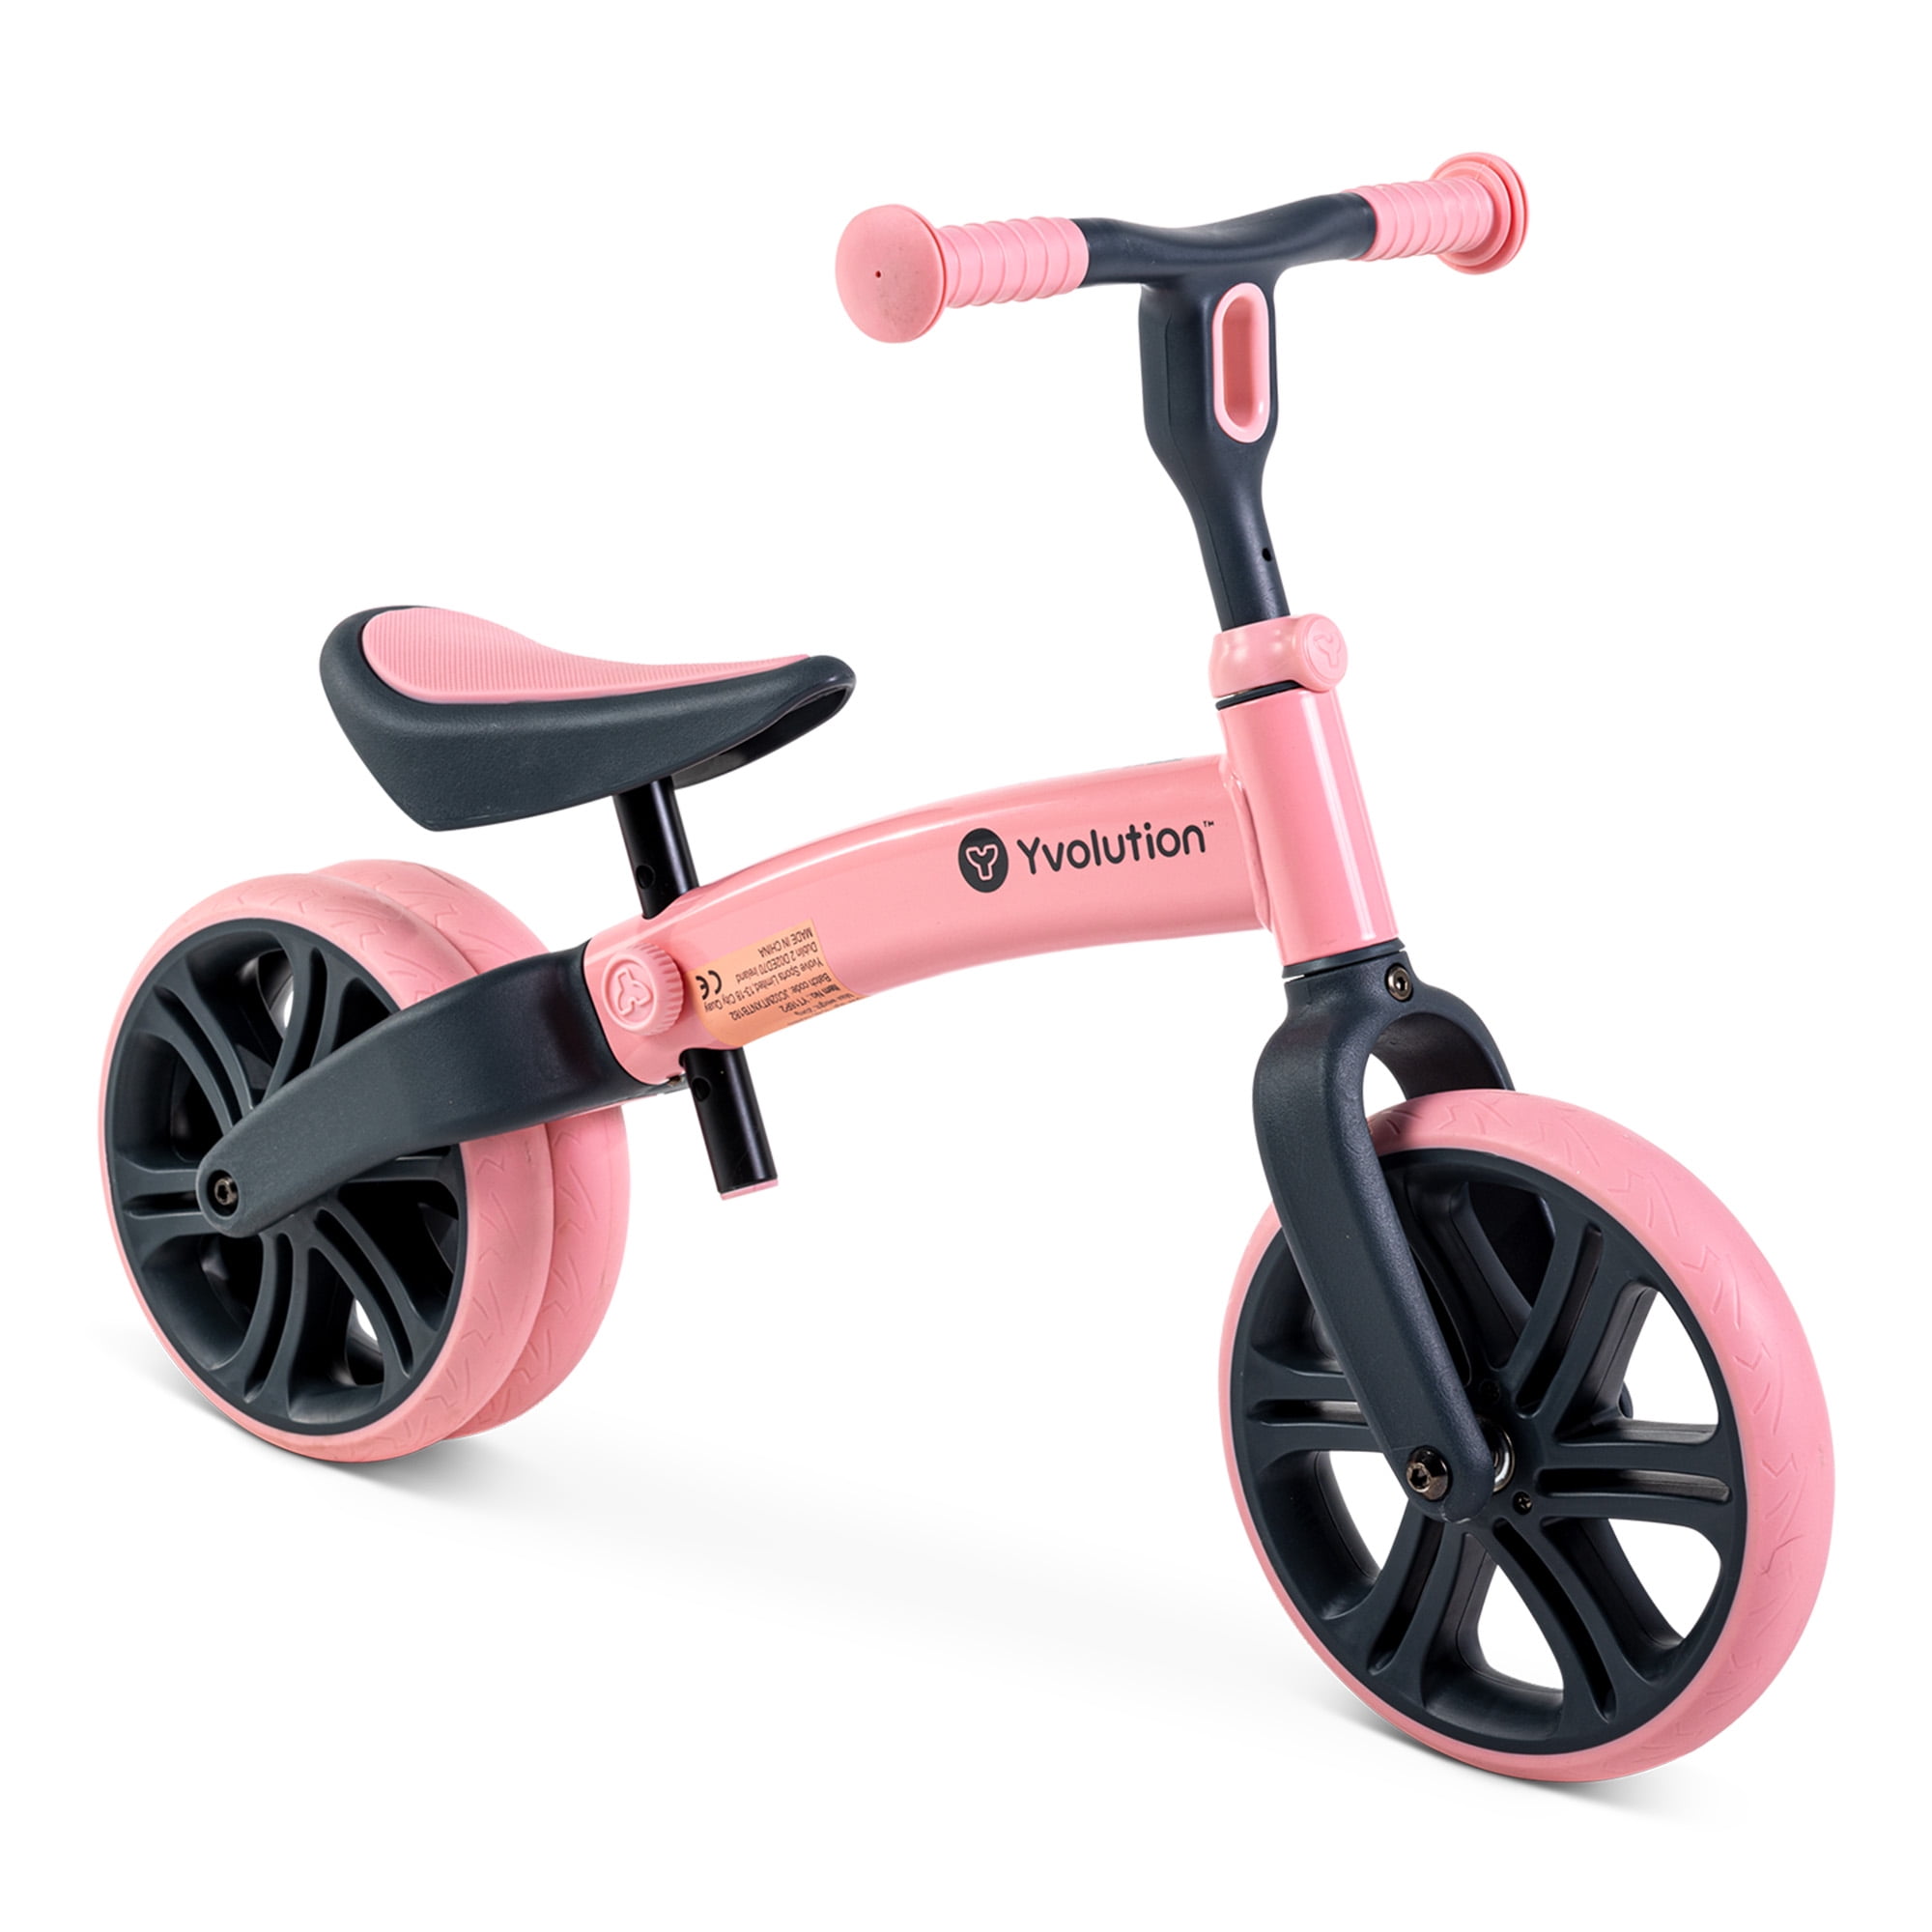 Yvolution Velo Toddler Months Old 18 Balance Bike Wheel Years Boys (Pink) 3 Girls, to and 9